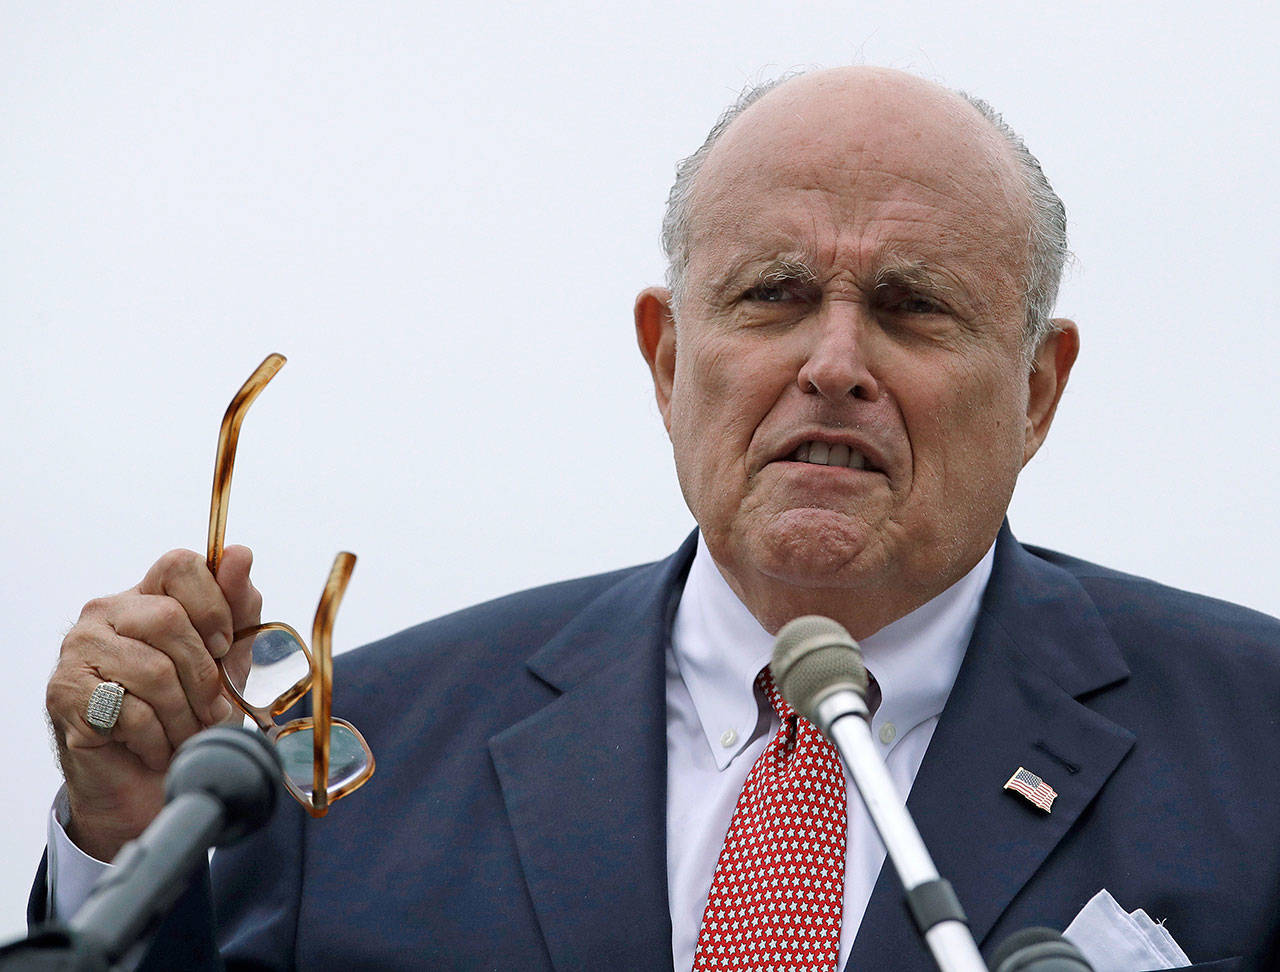 Rudy Giuliani, an attorney for President Donald Trump, speaks in Portsmouth, New Hampshire, on Aug. 1. (AP Photo/Charles Krupa, File)